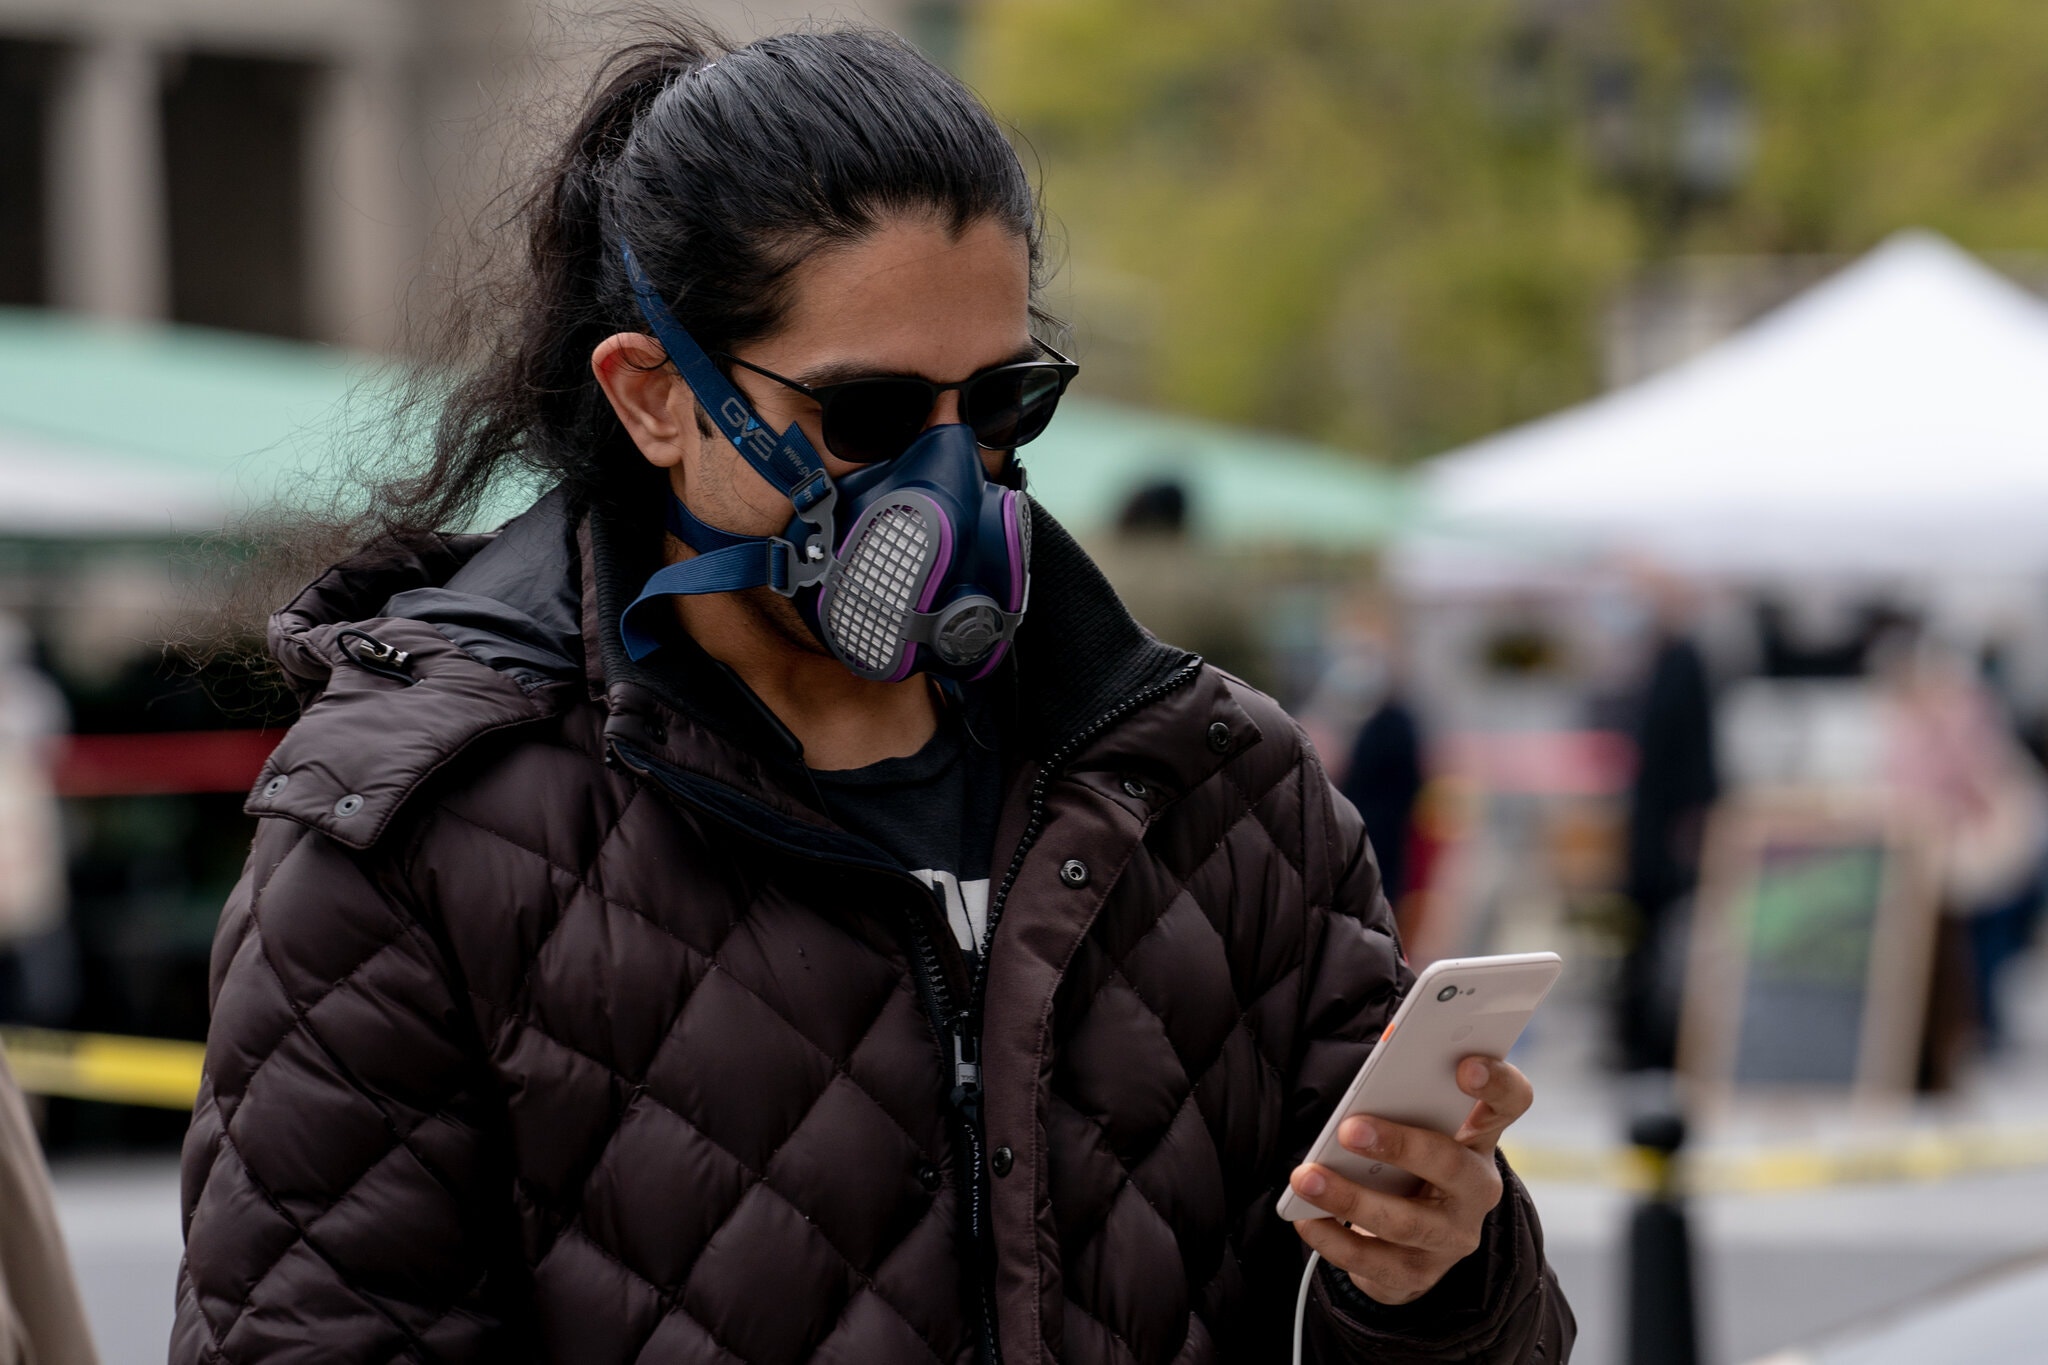 A person wearing a mask and sunglasses is using a smartphone with a location tracking app icon on the screen.